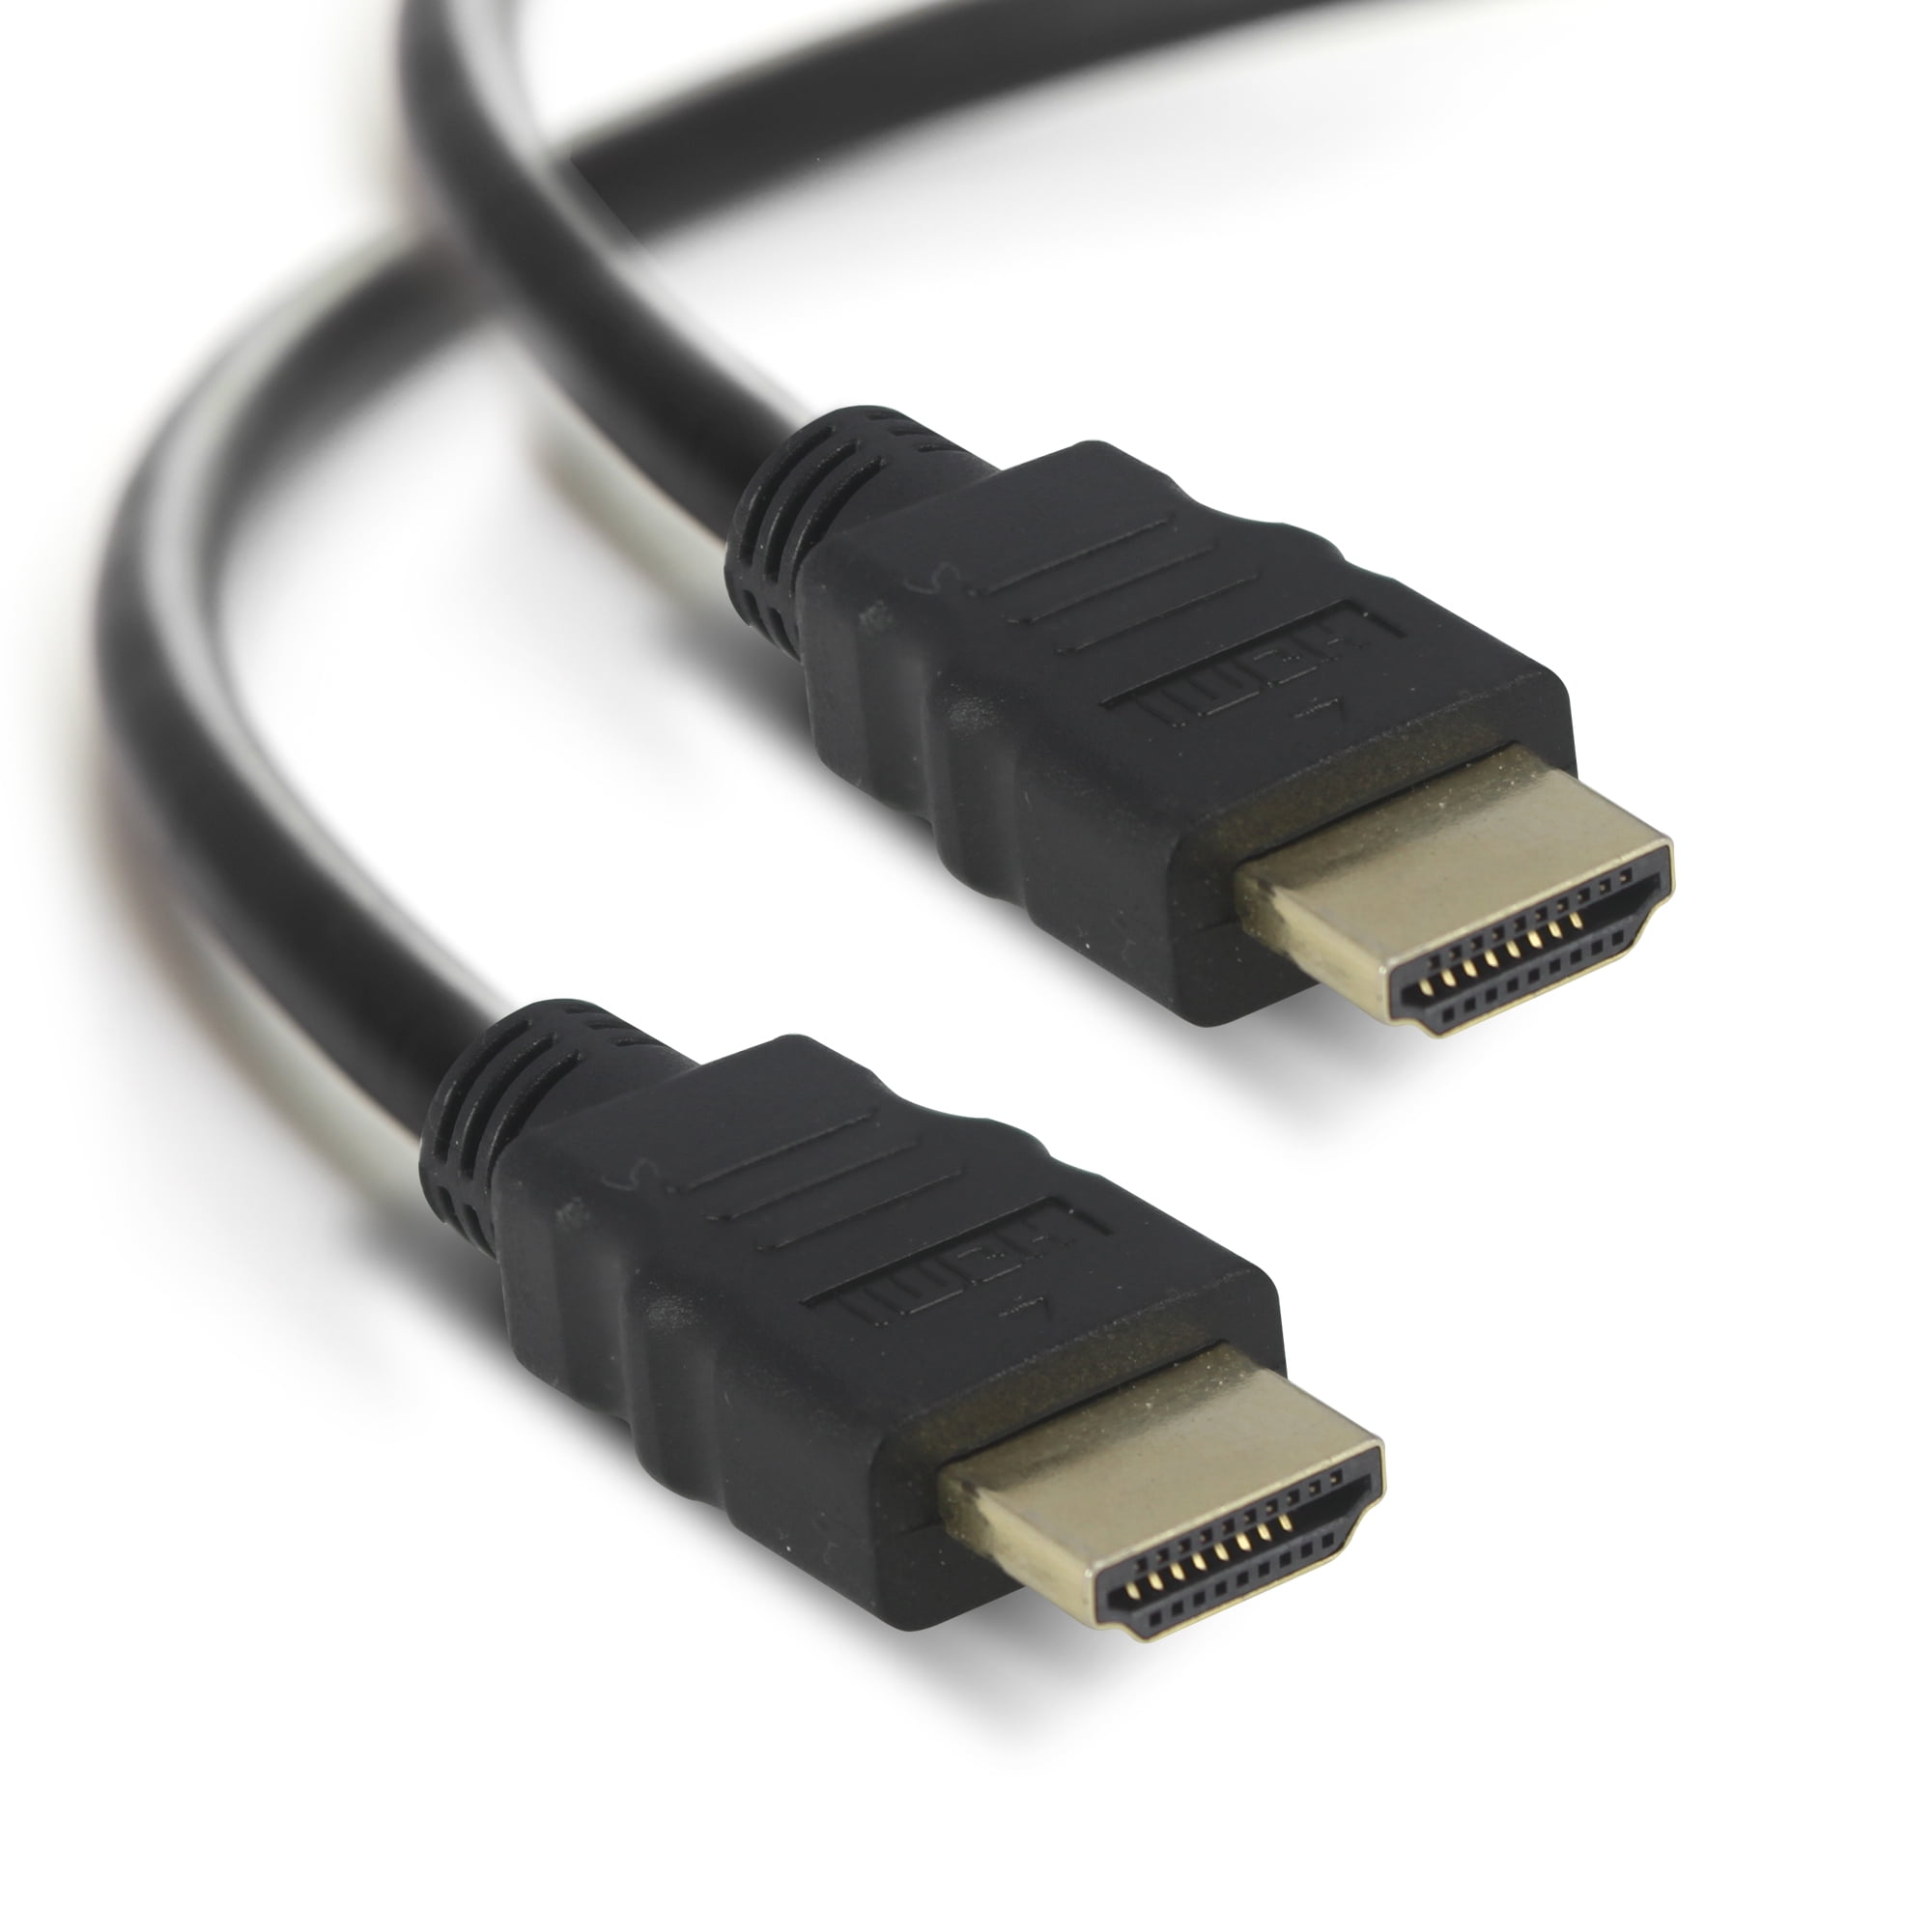 Hdmi support